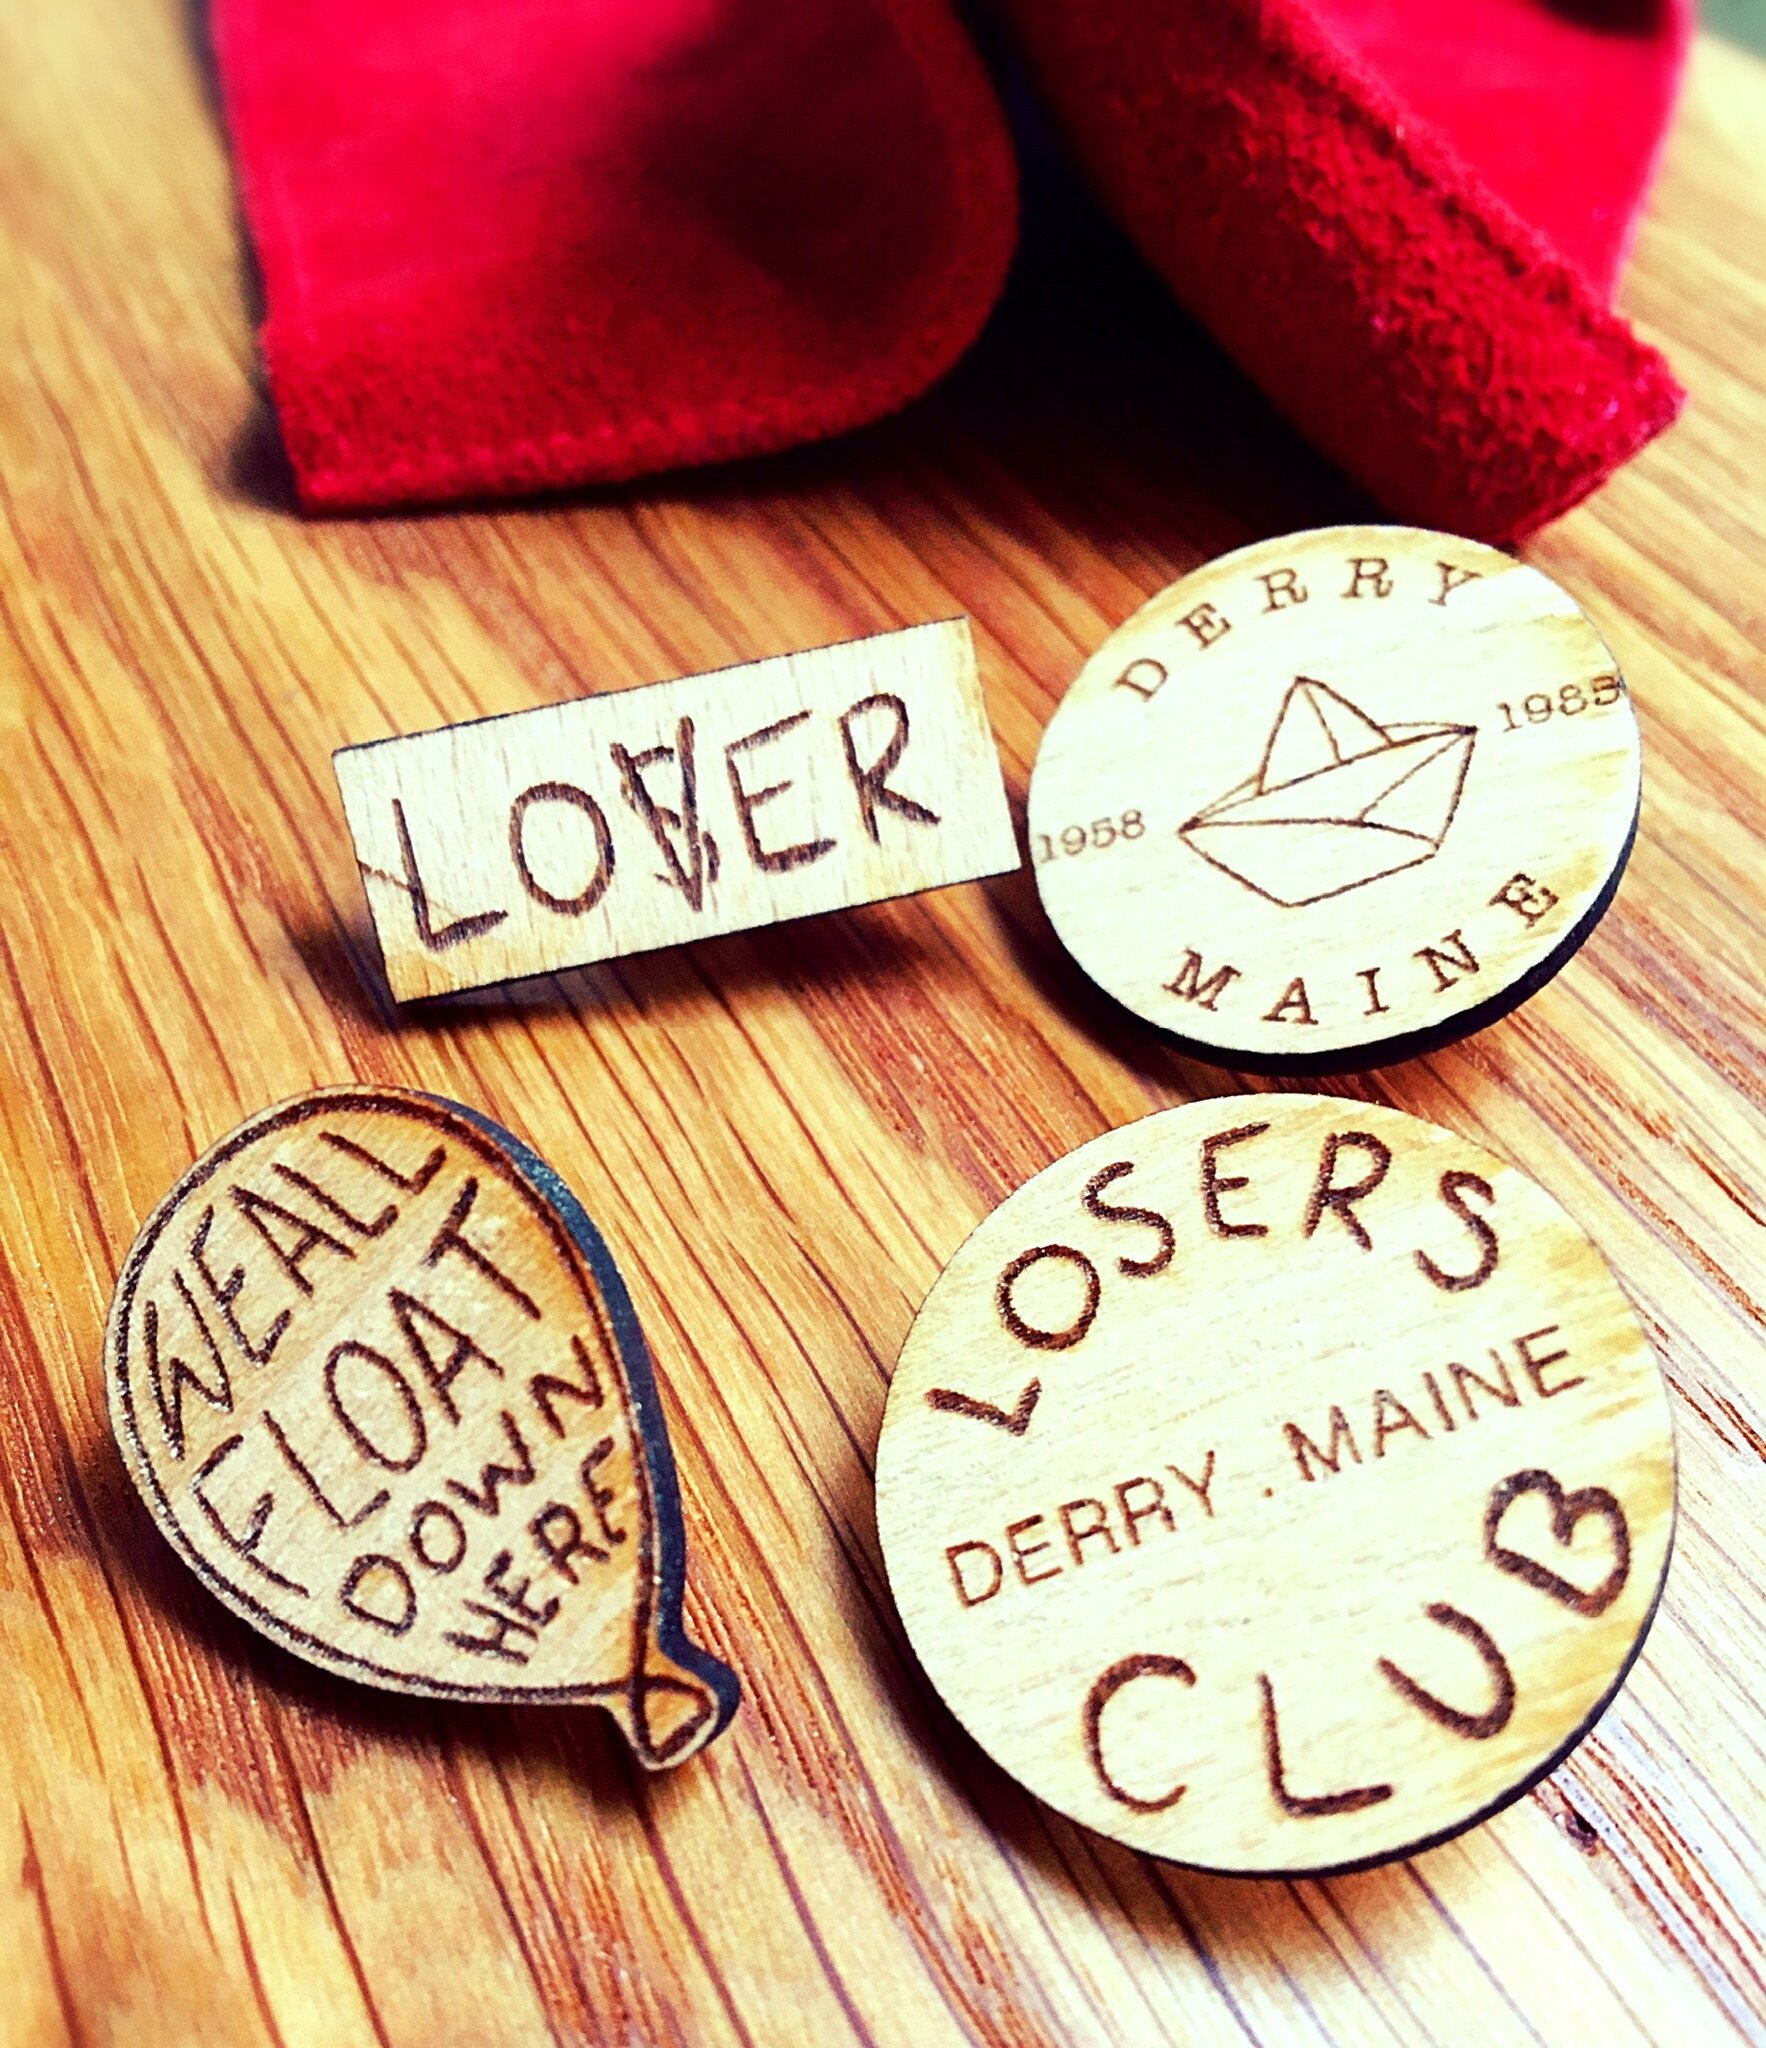  IT Movie Derry Losers Club Pin Badges.  We all float down here! 